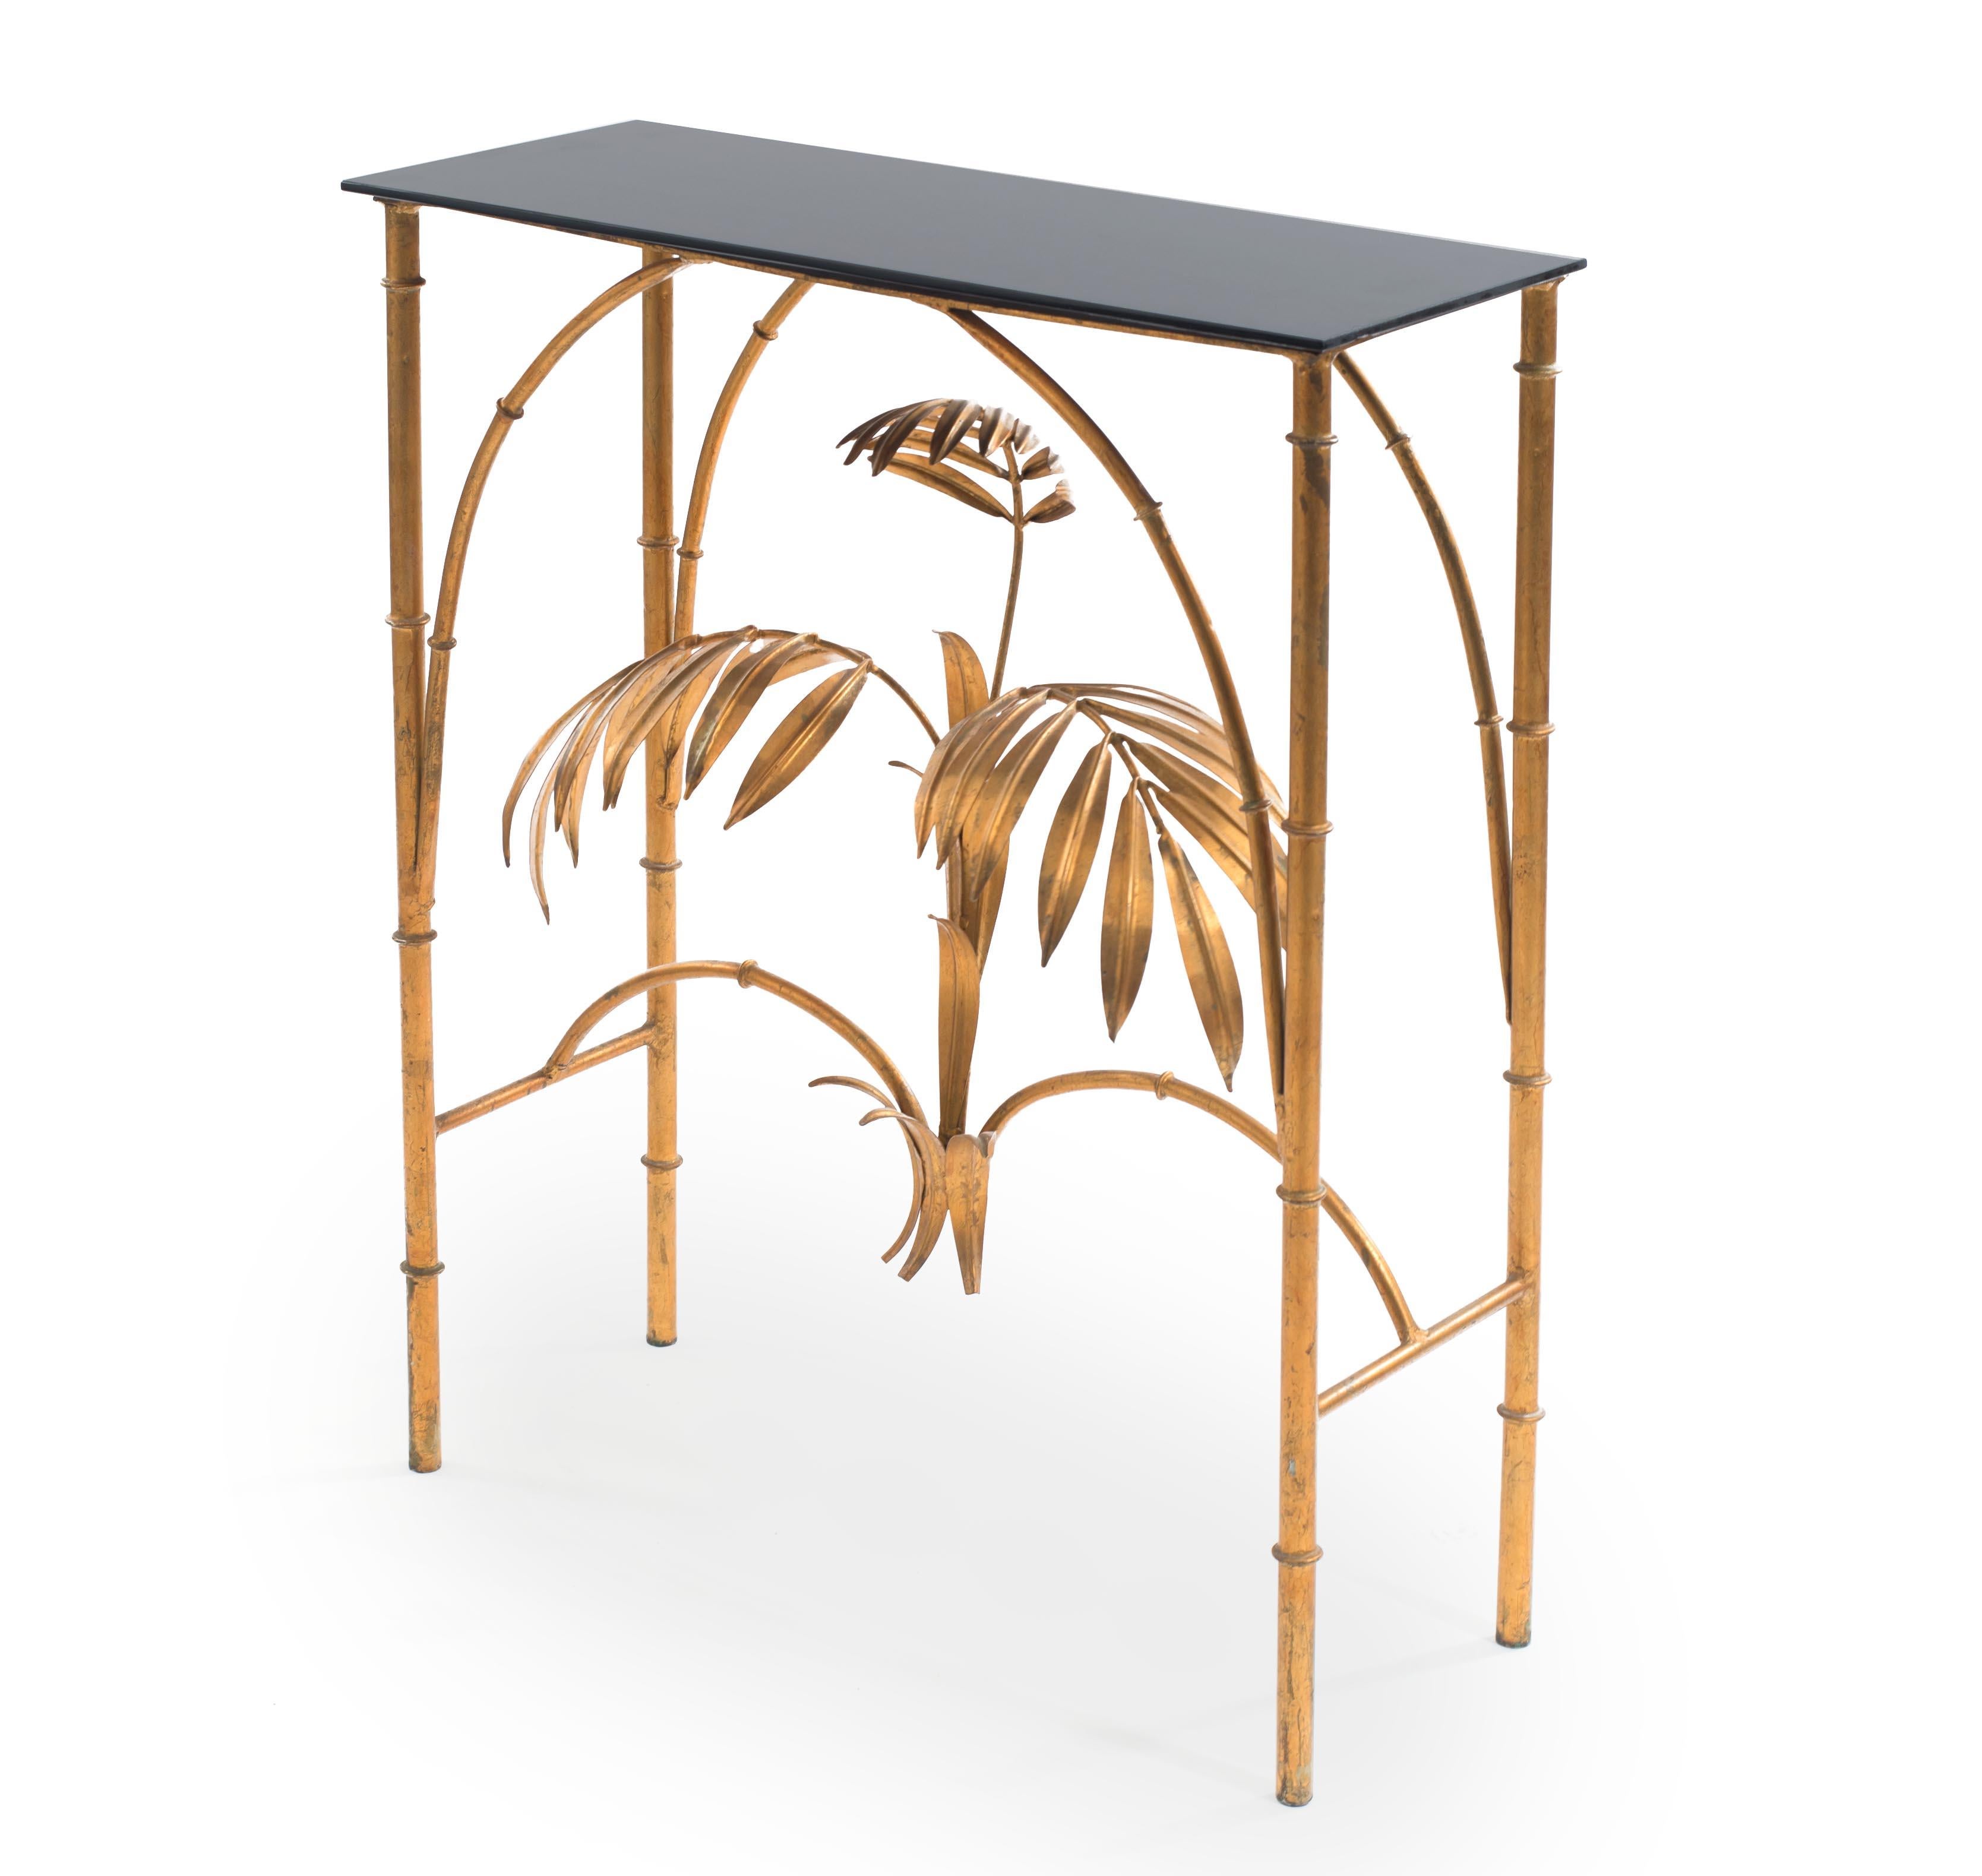 Italian (20th century) faux bamboo gilt metal console table with palm design stretcher and a rectangular black glass top.
 